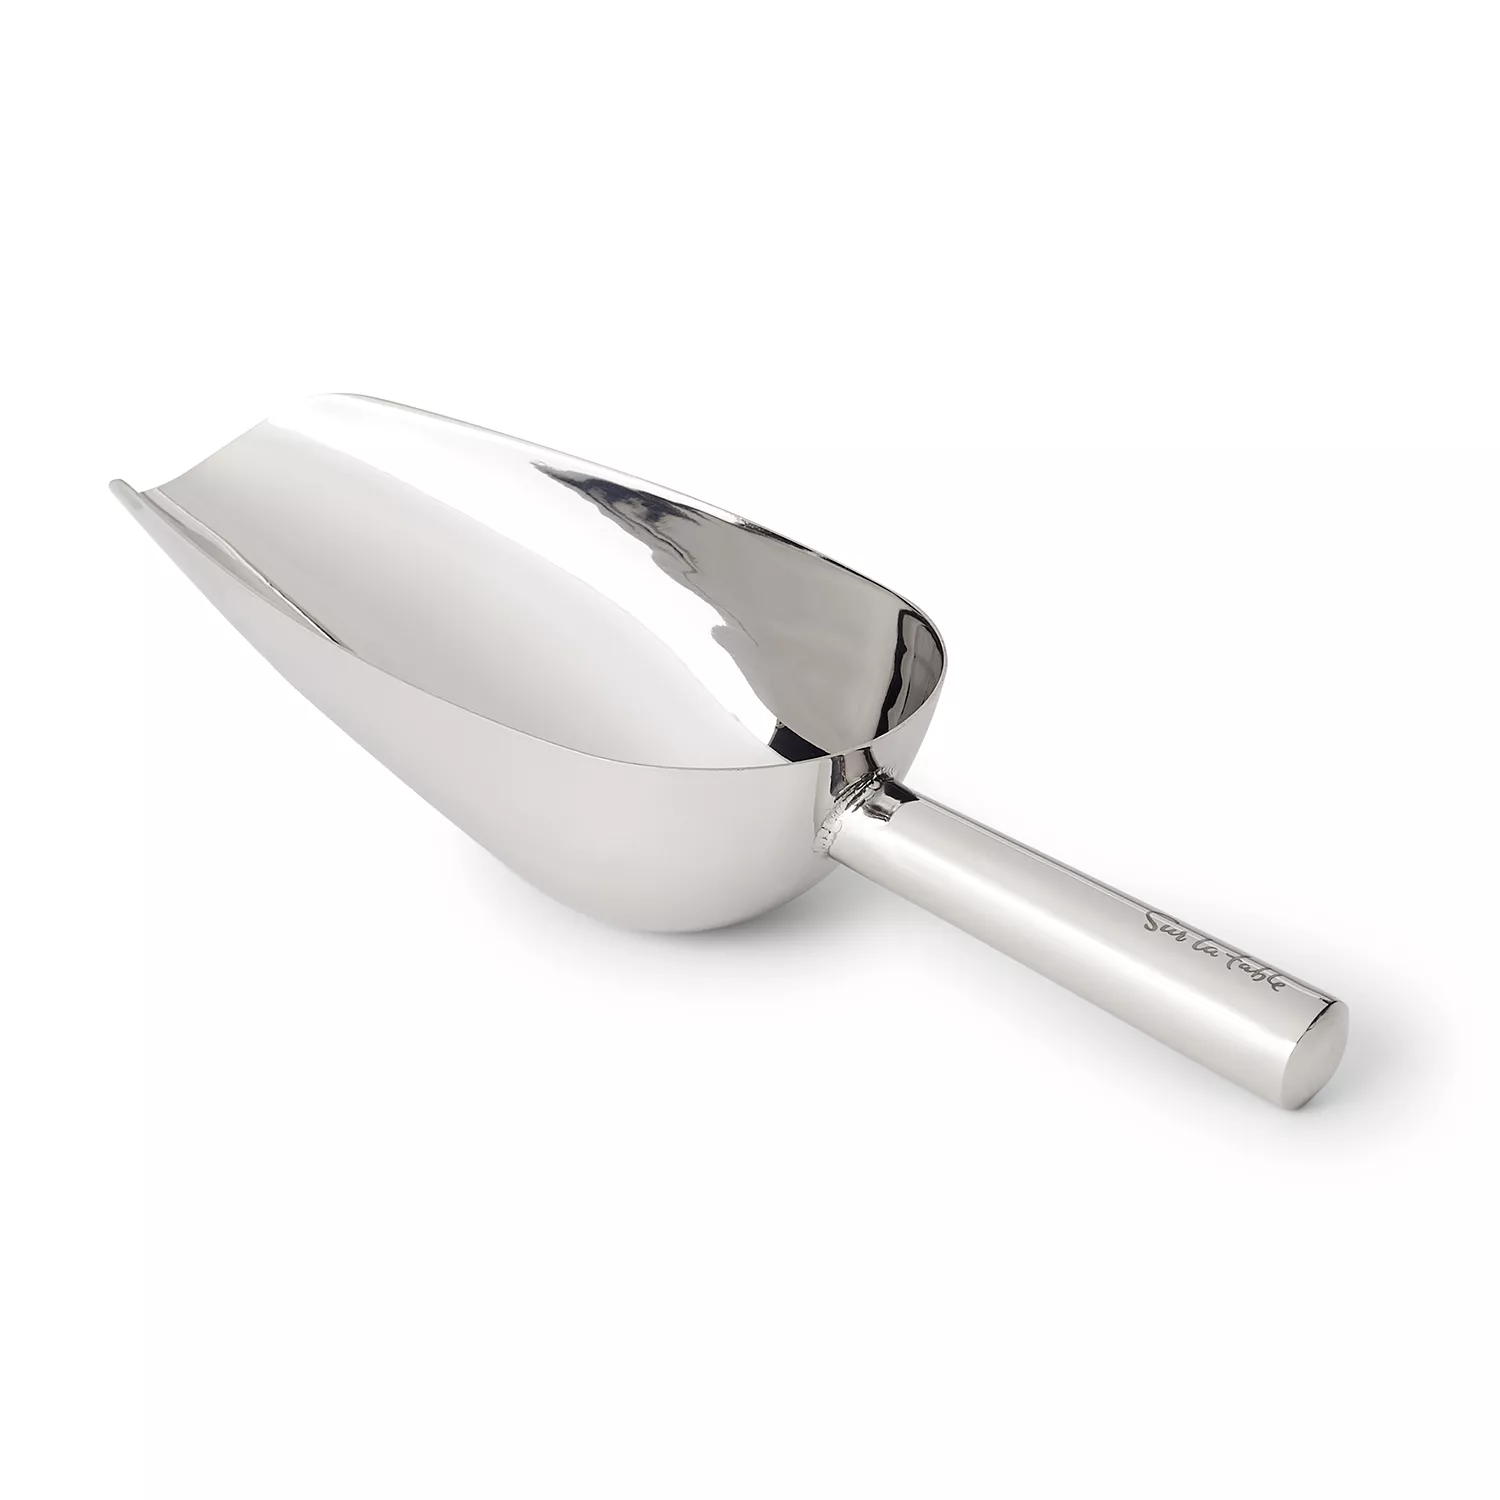 6 Ounce Ice Scoop Set of 2, Vesteel Small Stainless Steel Scoops for Ice Metal